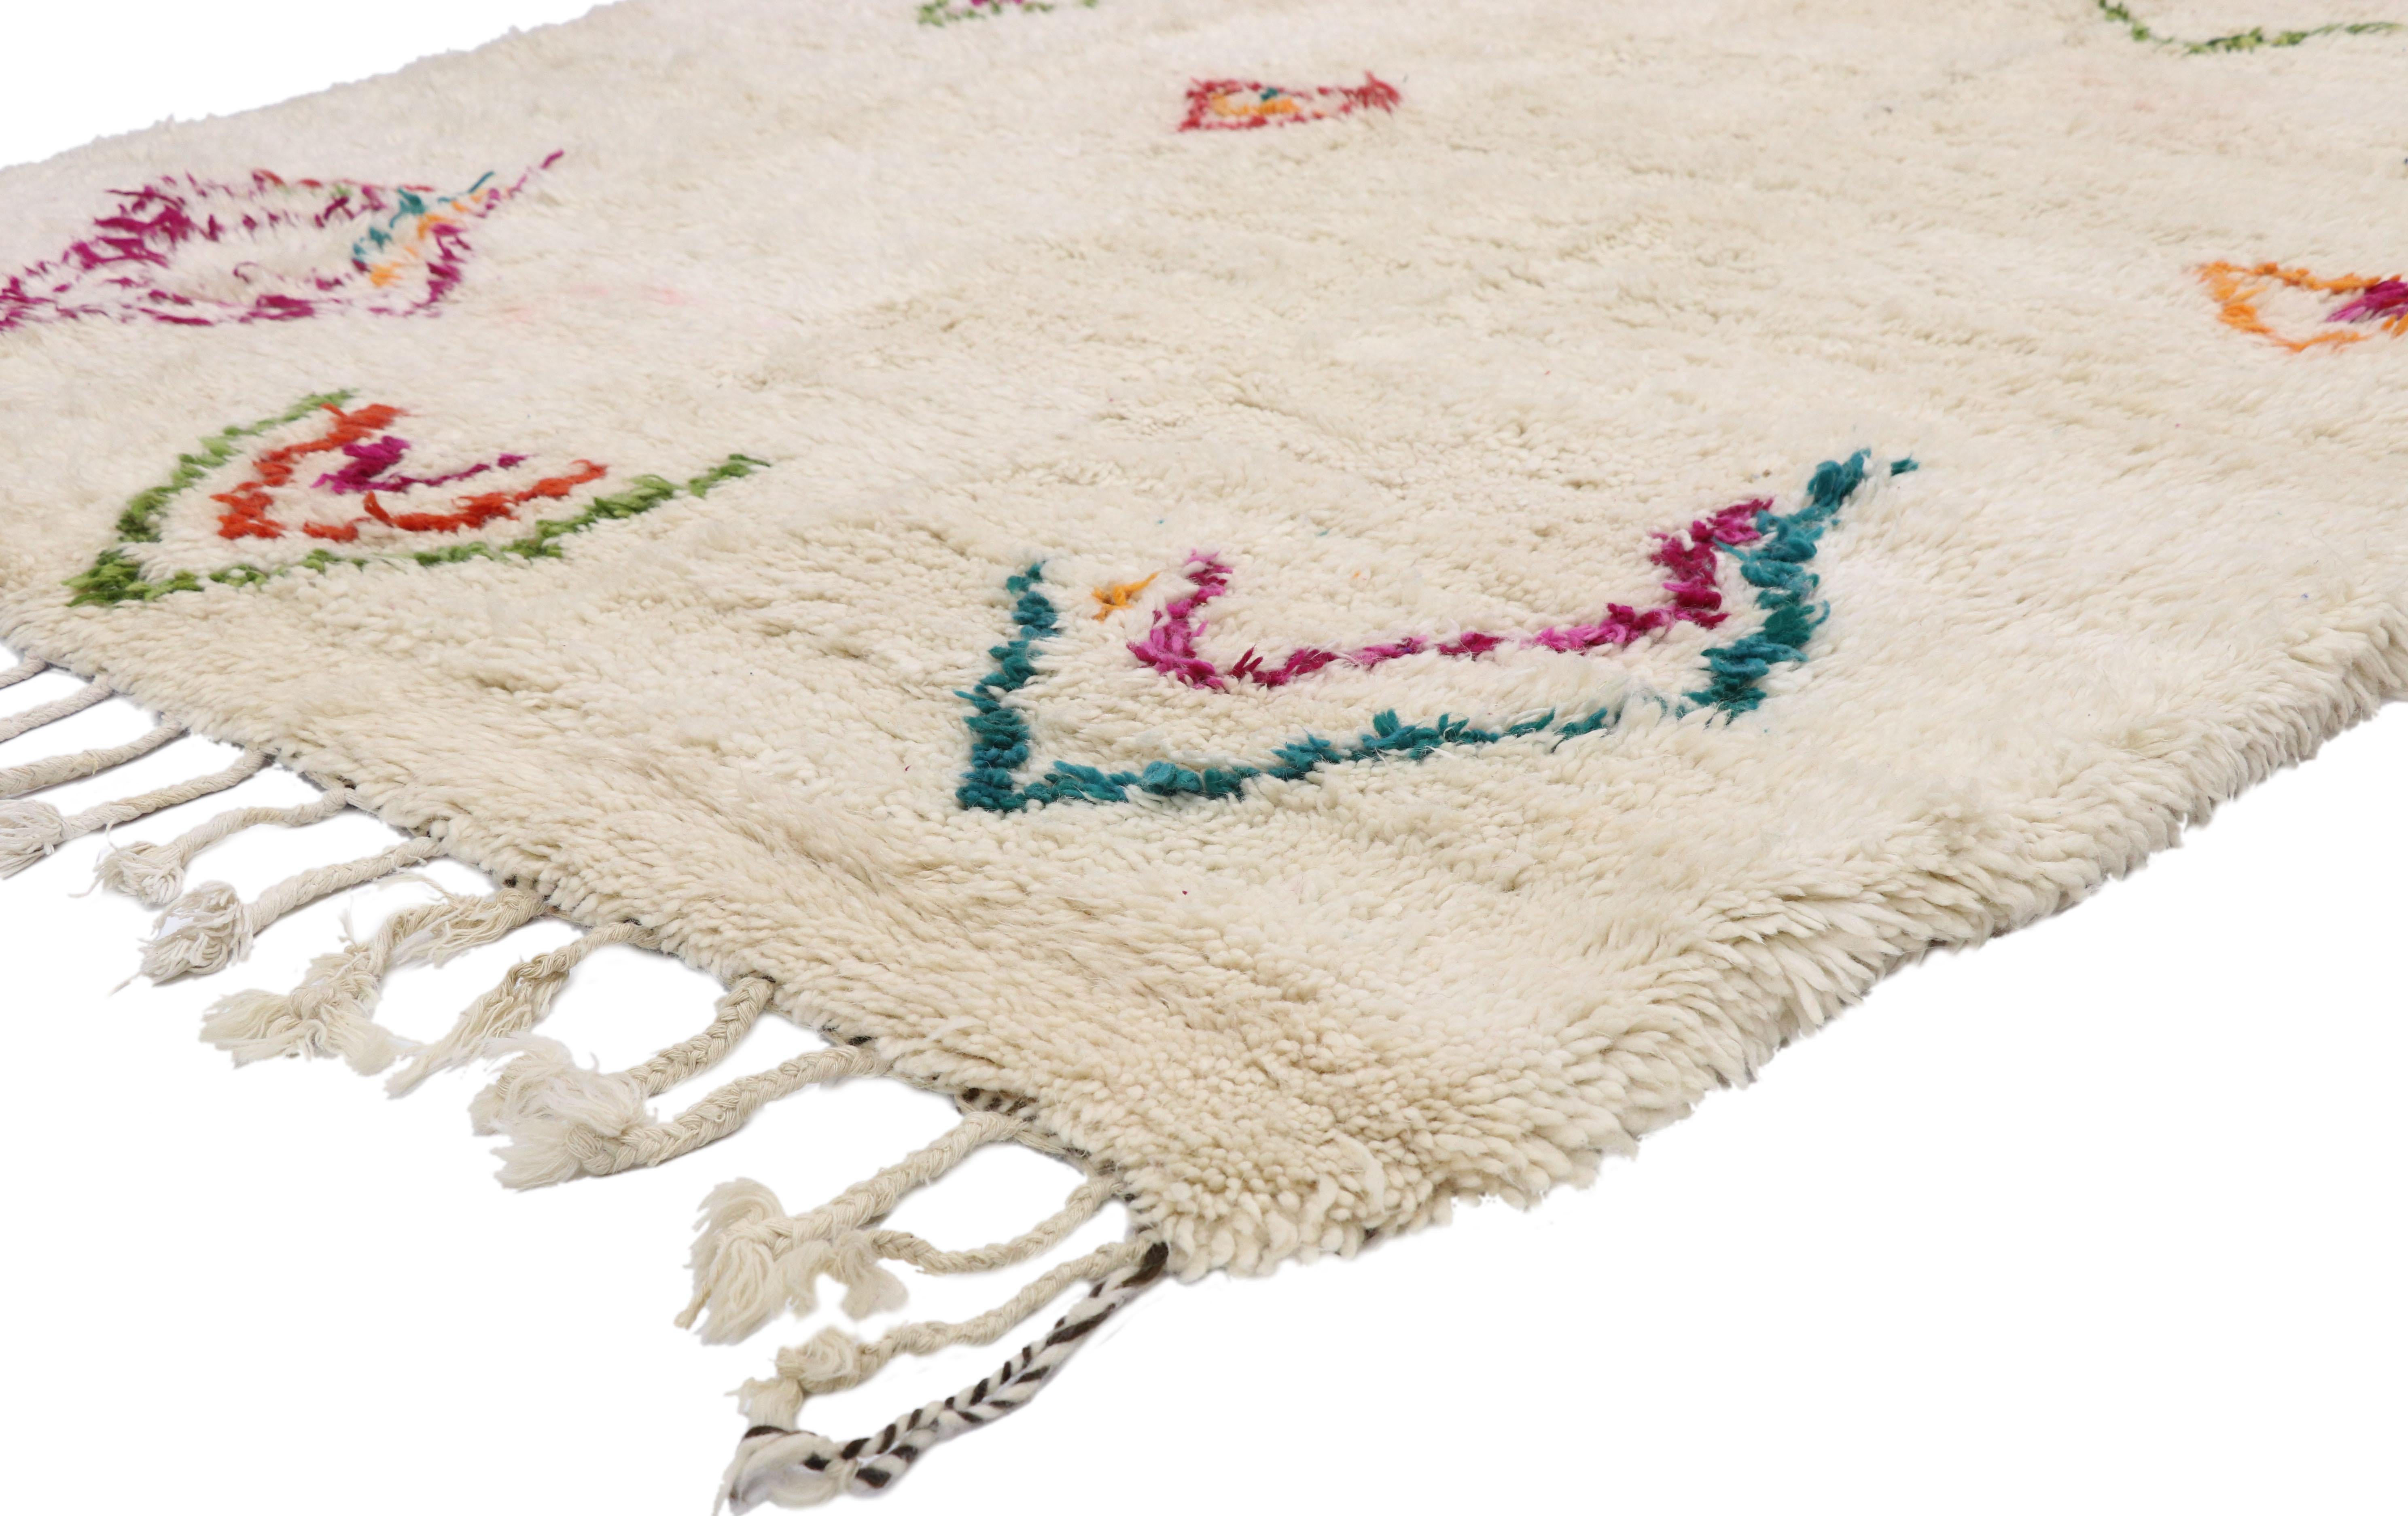 21039, new contemporary Berber Moroccan Azilal rug with Cozy Hygge boho tribal vibes. This hand knotted wool contemporary Berber Moroccan Azilal rug features colorful tribal motifs spread across the creamy-beige backdrop. The ambiguous tribal